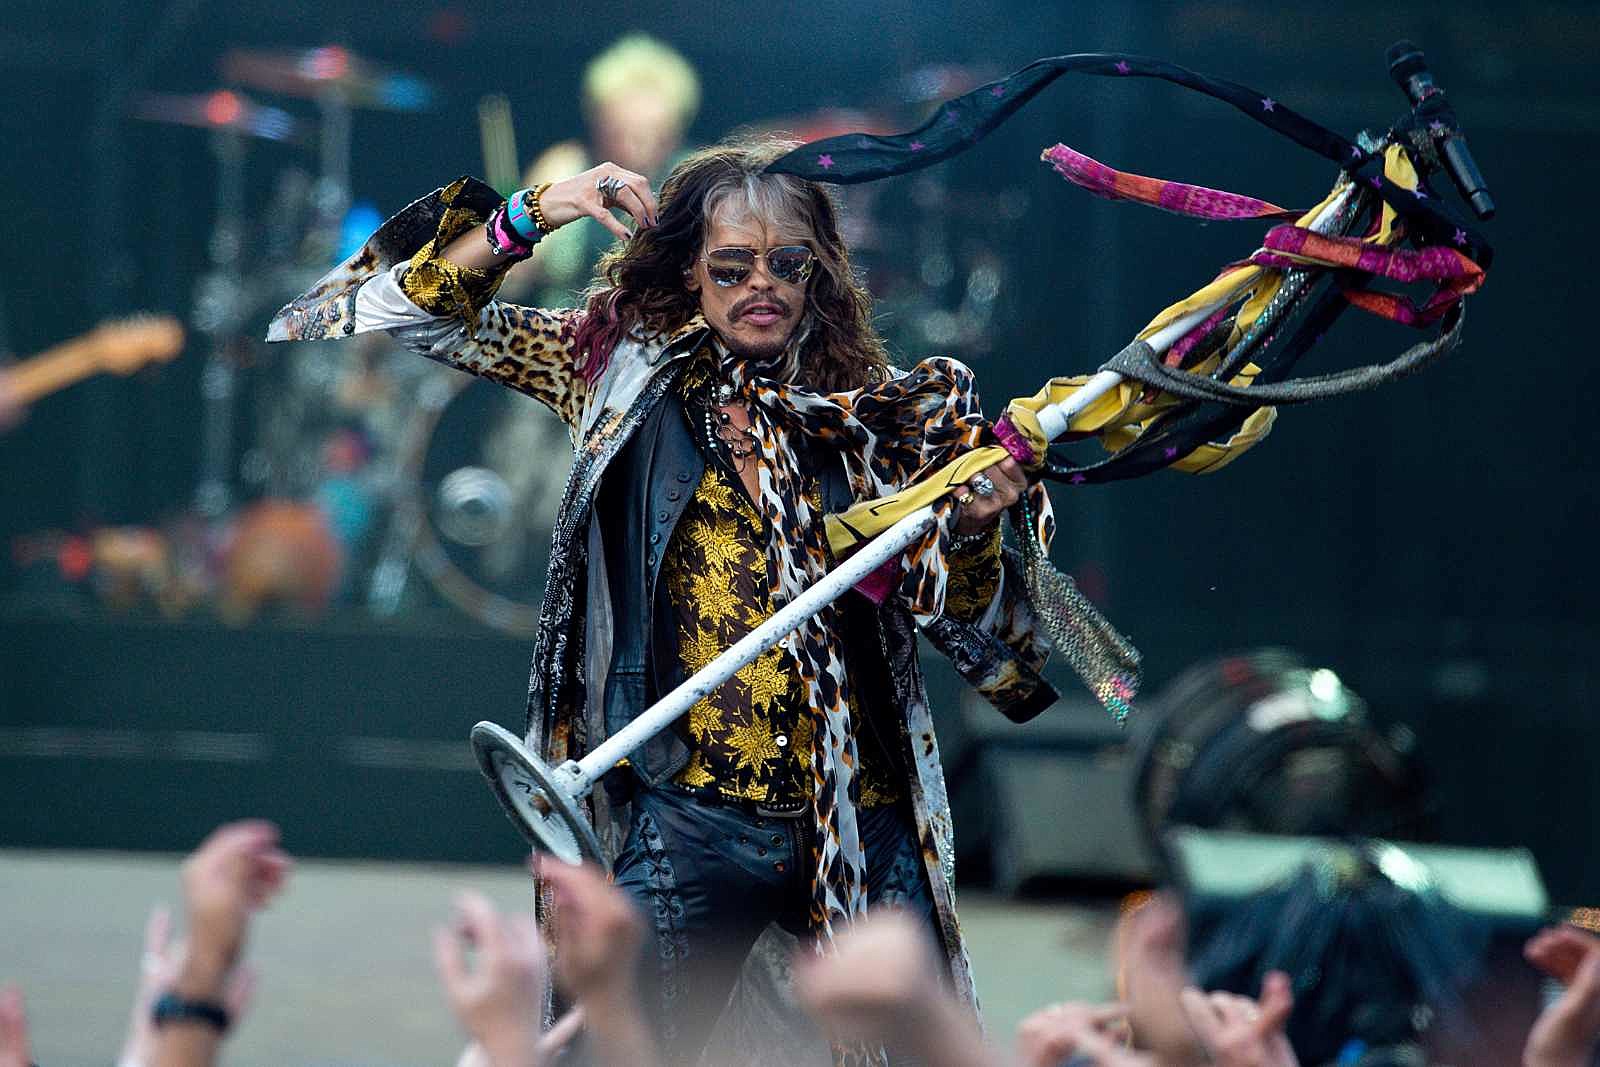 Aerosmith Peace Out The Final Farewell Tour, 50th Anniversary of